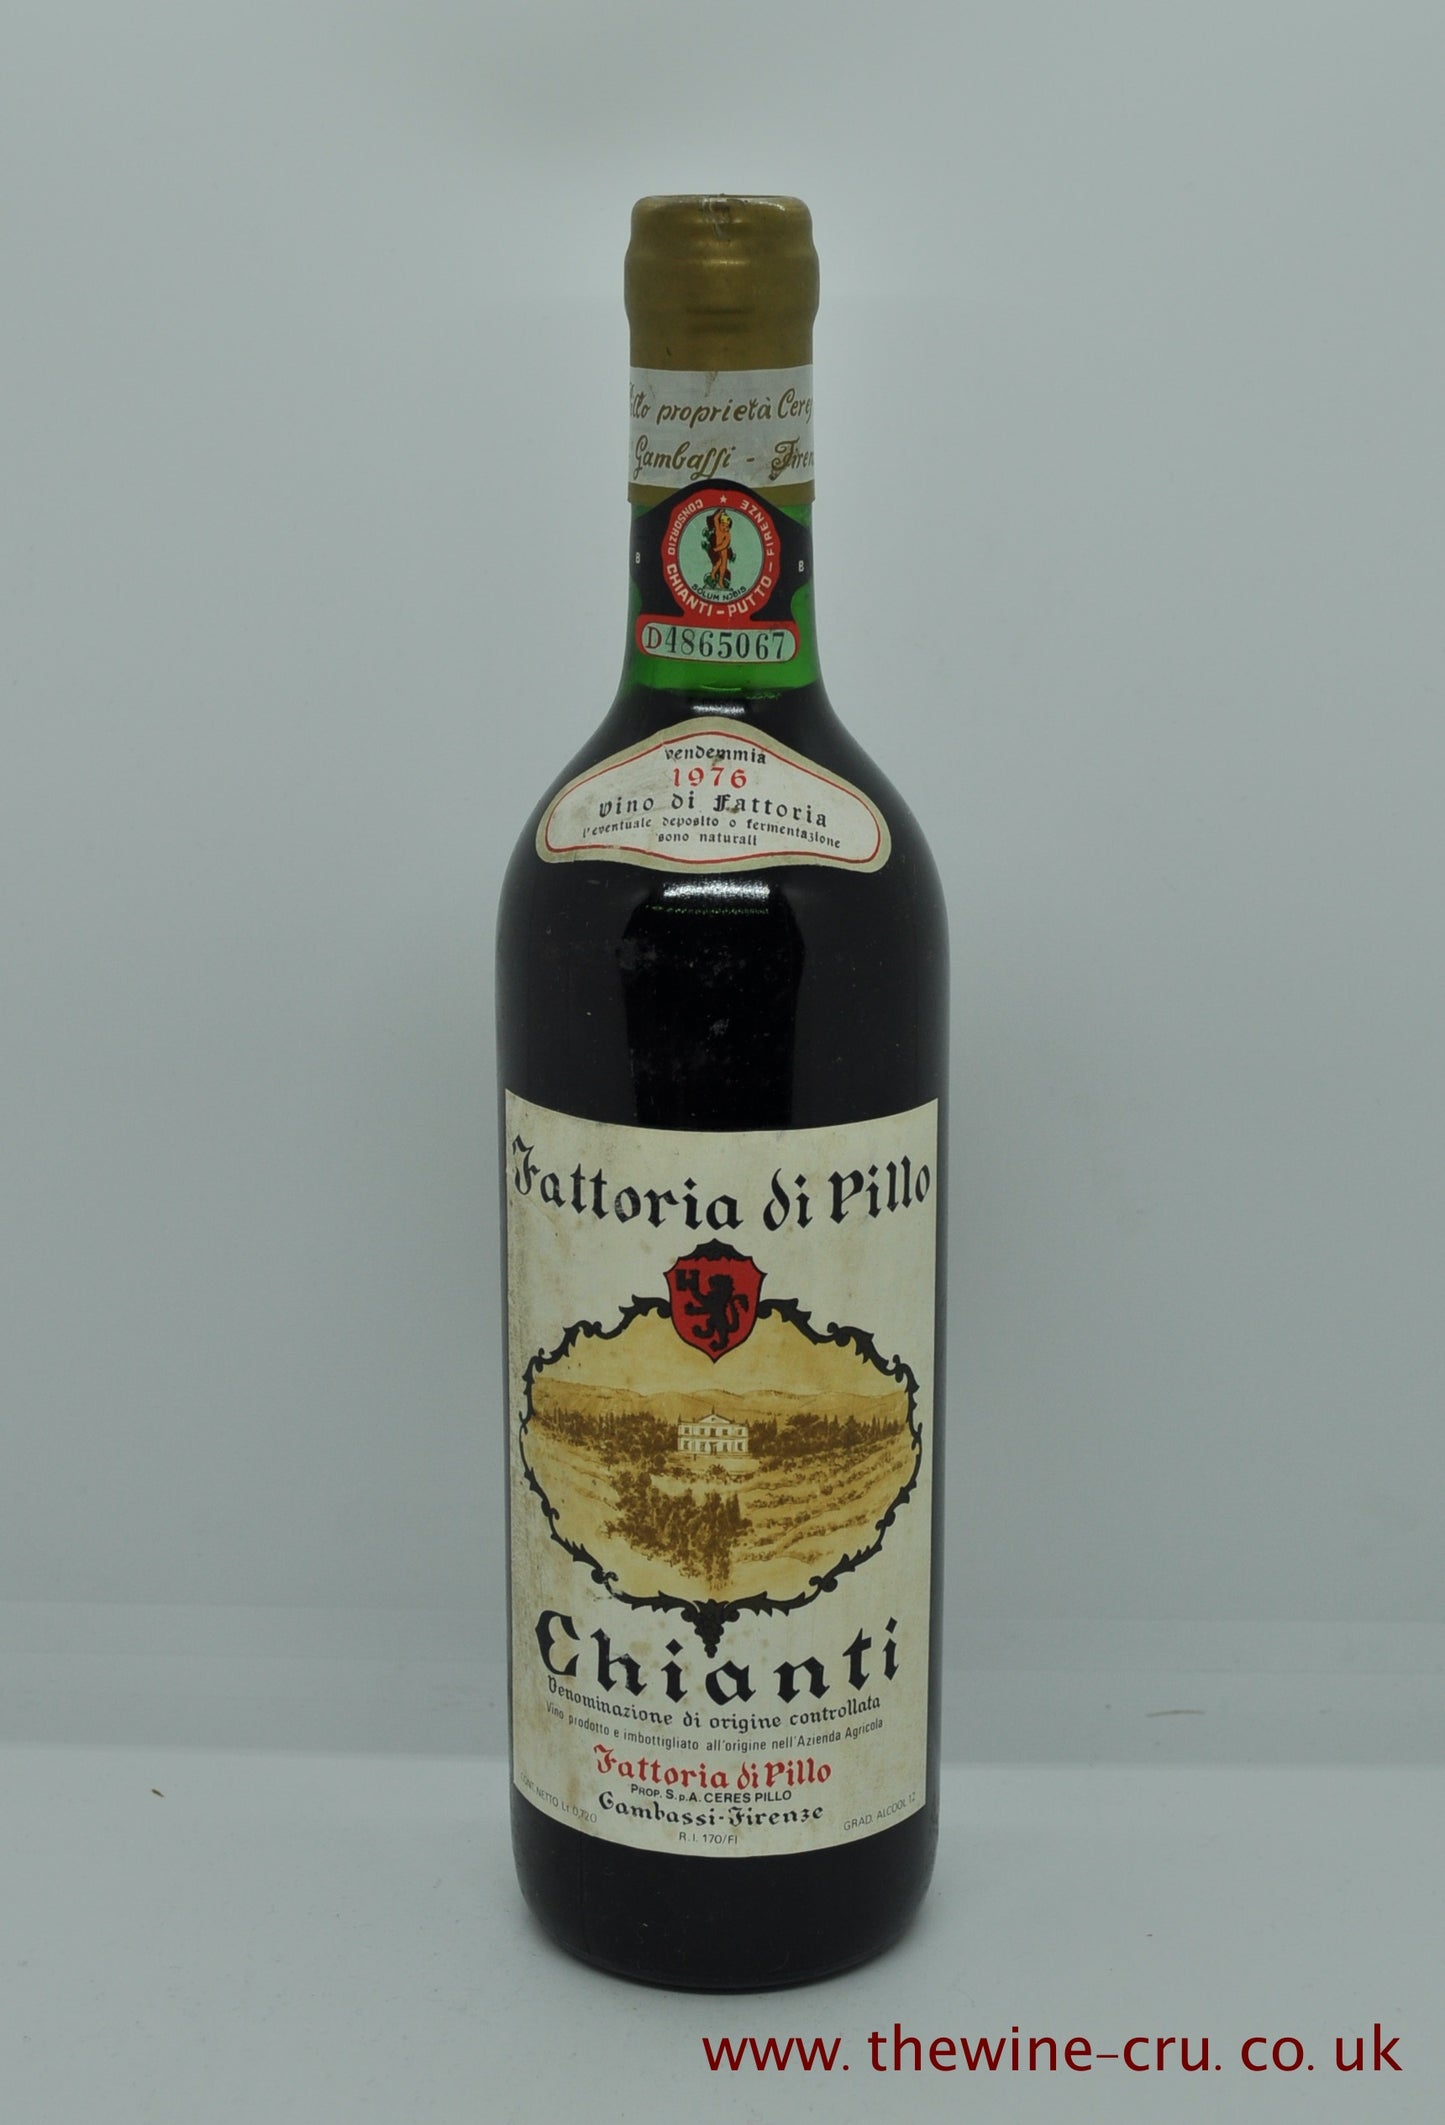 A bottle of 1976 vintage red wine. Chianti Fattoria di Pillo, Tuscany Italy. The bottle is in good condition with the wine level being base of neck. Immediate delivery. Free local delivery. Gift wrapping available.